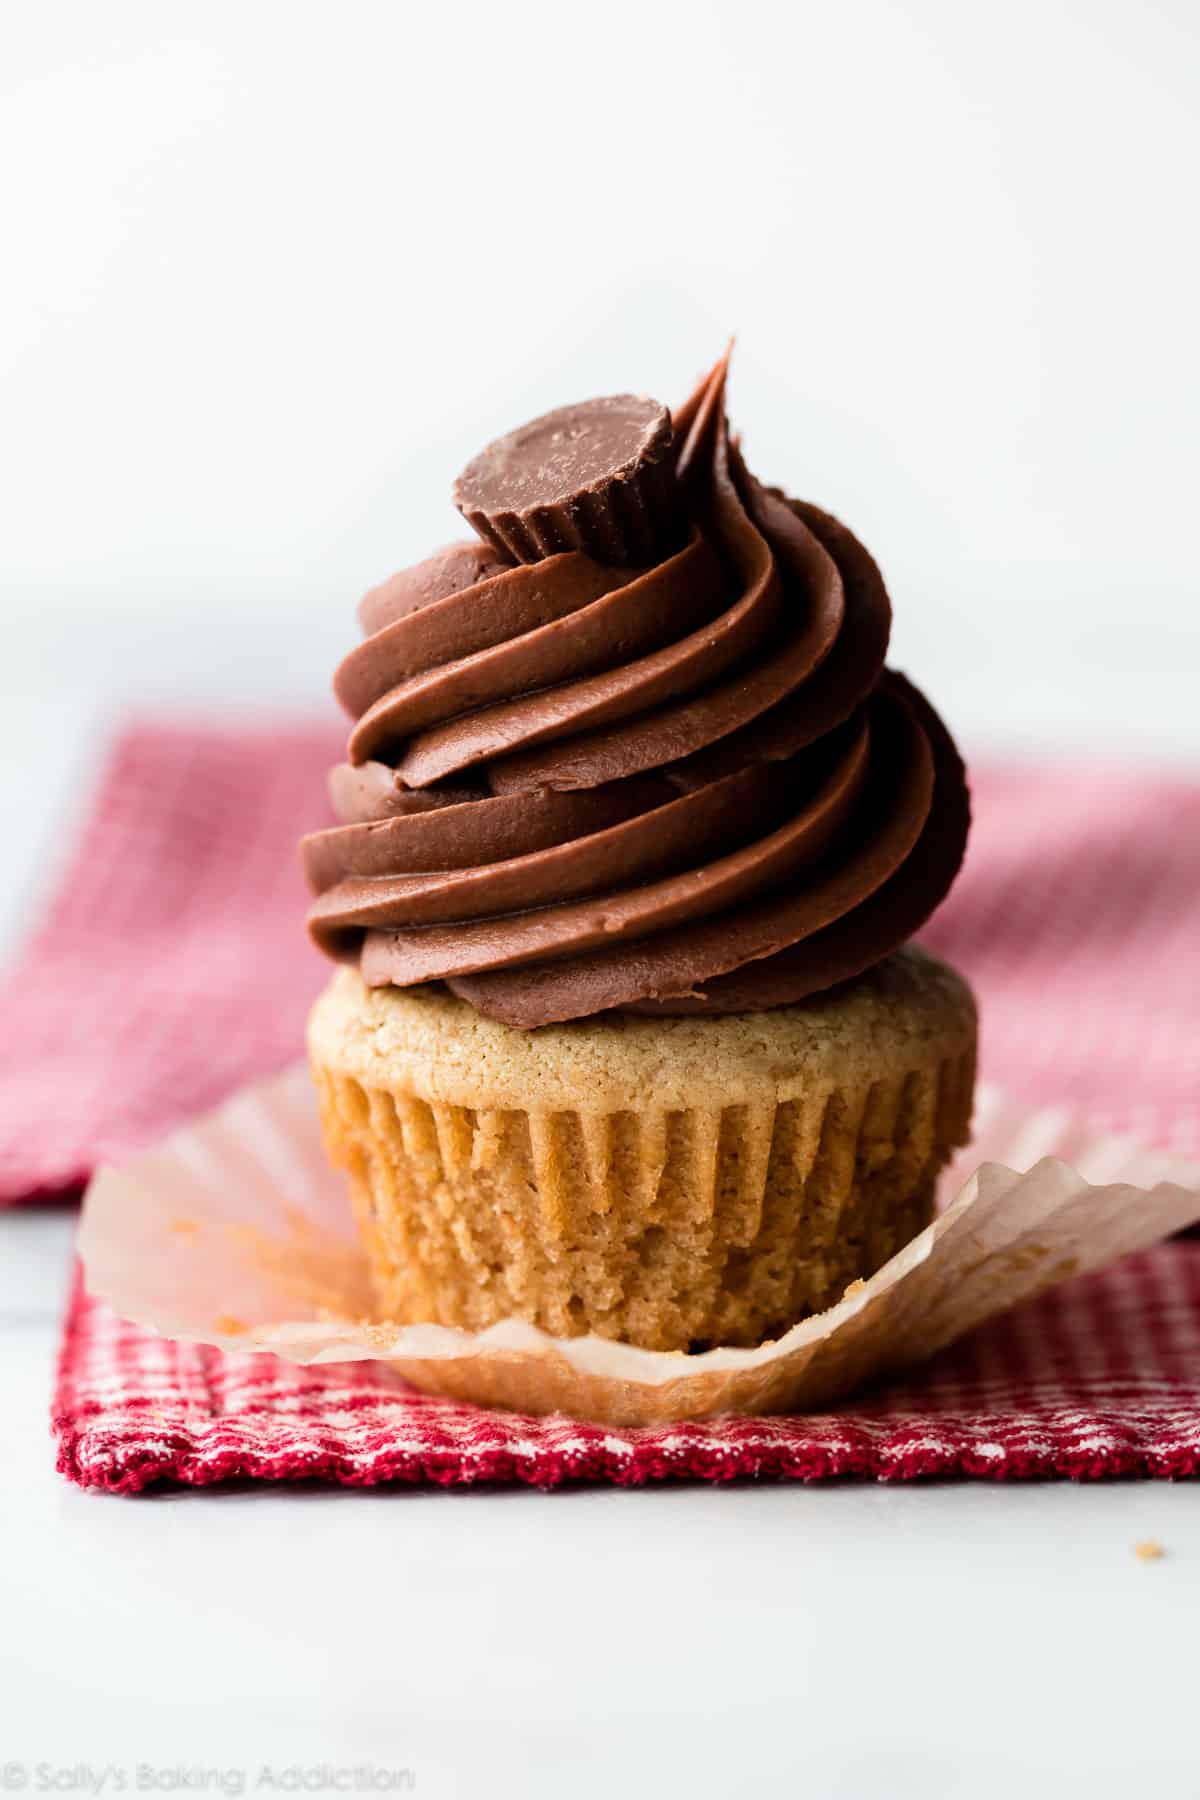 Chocolate peanut butter frosting